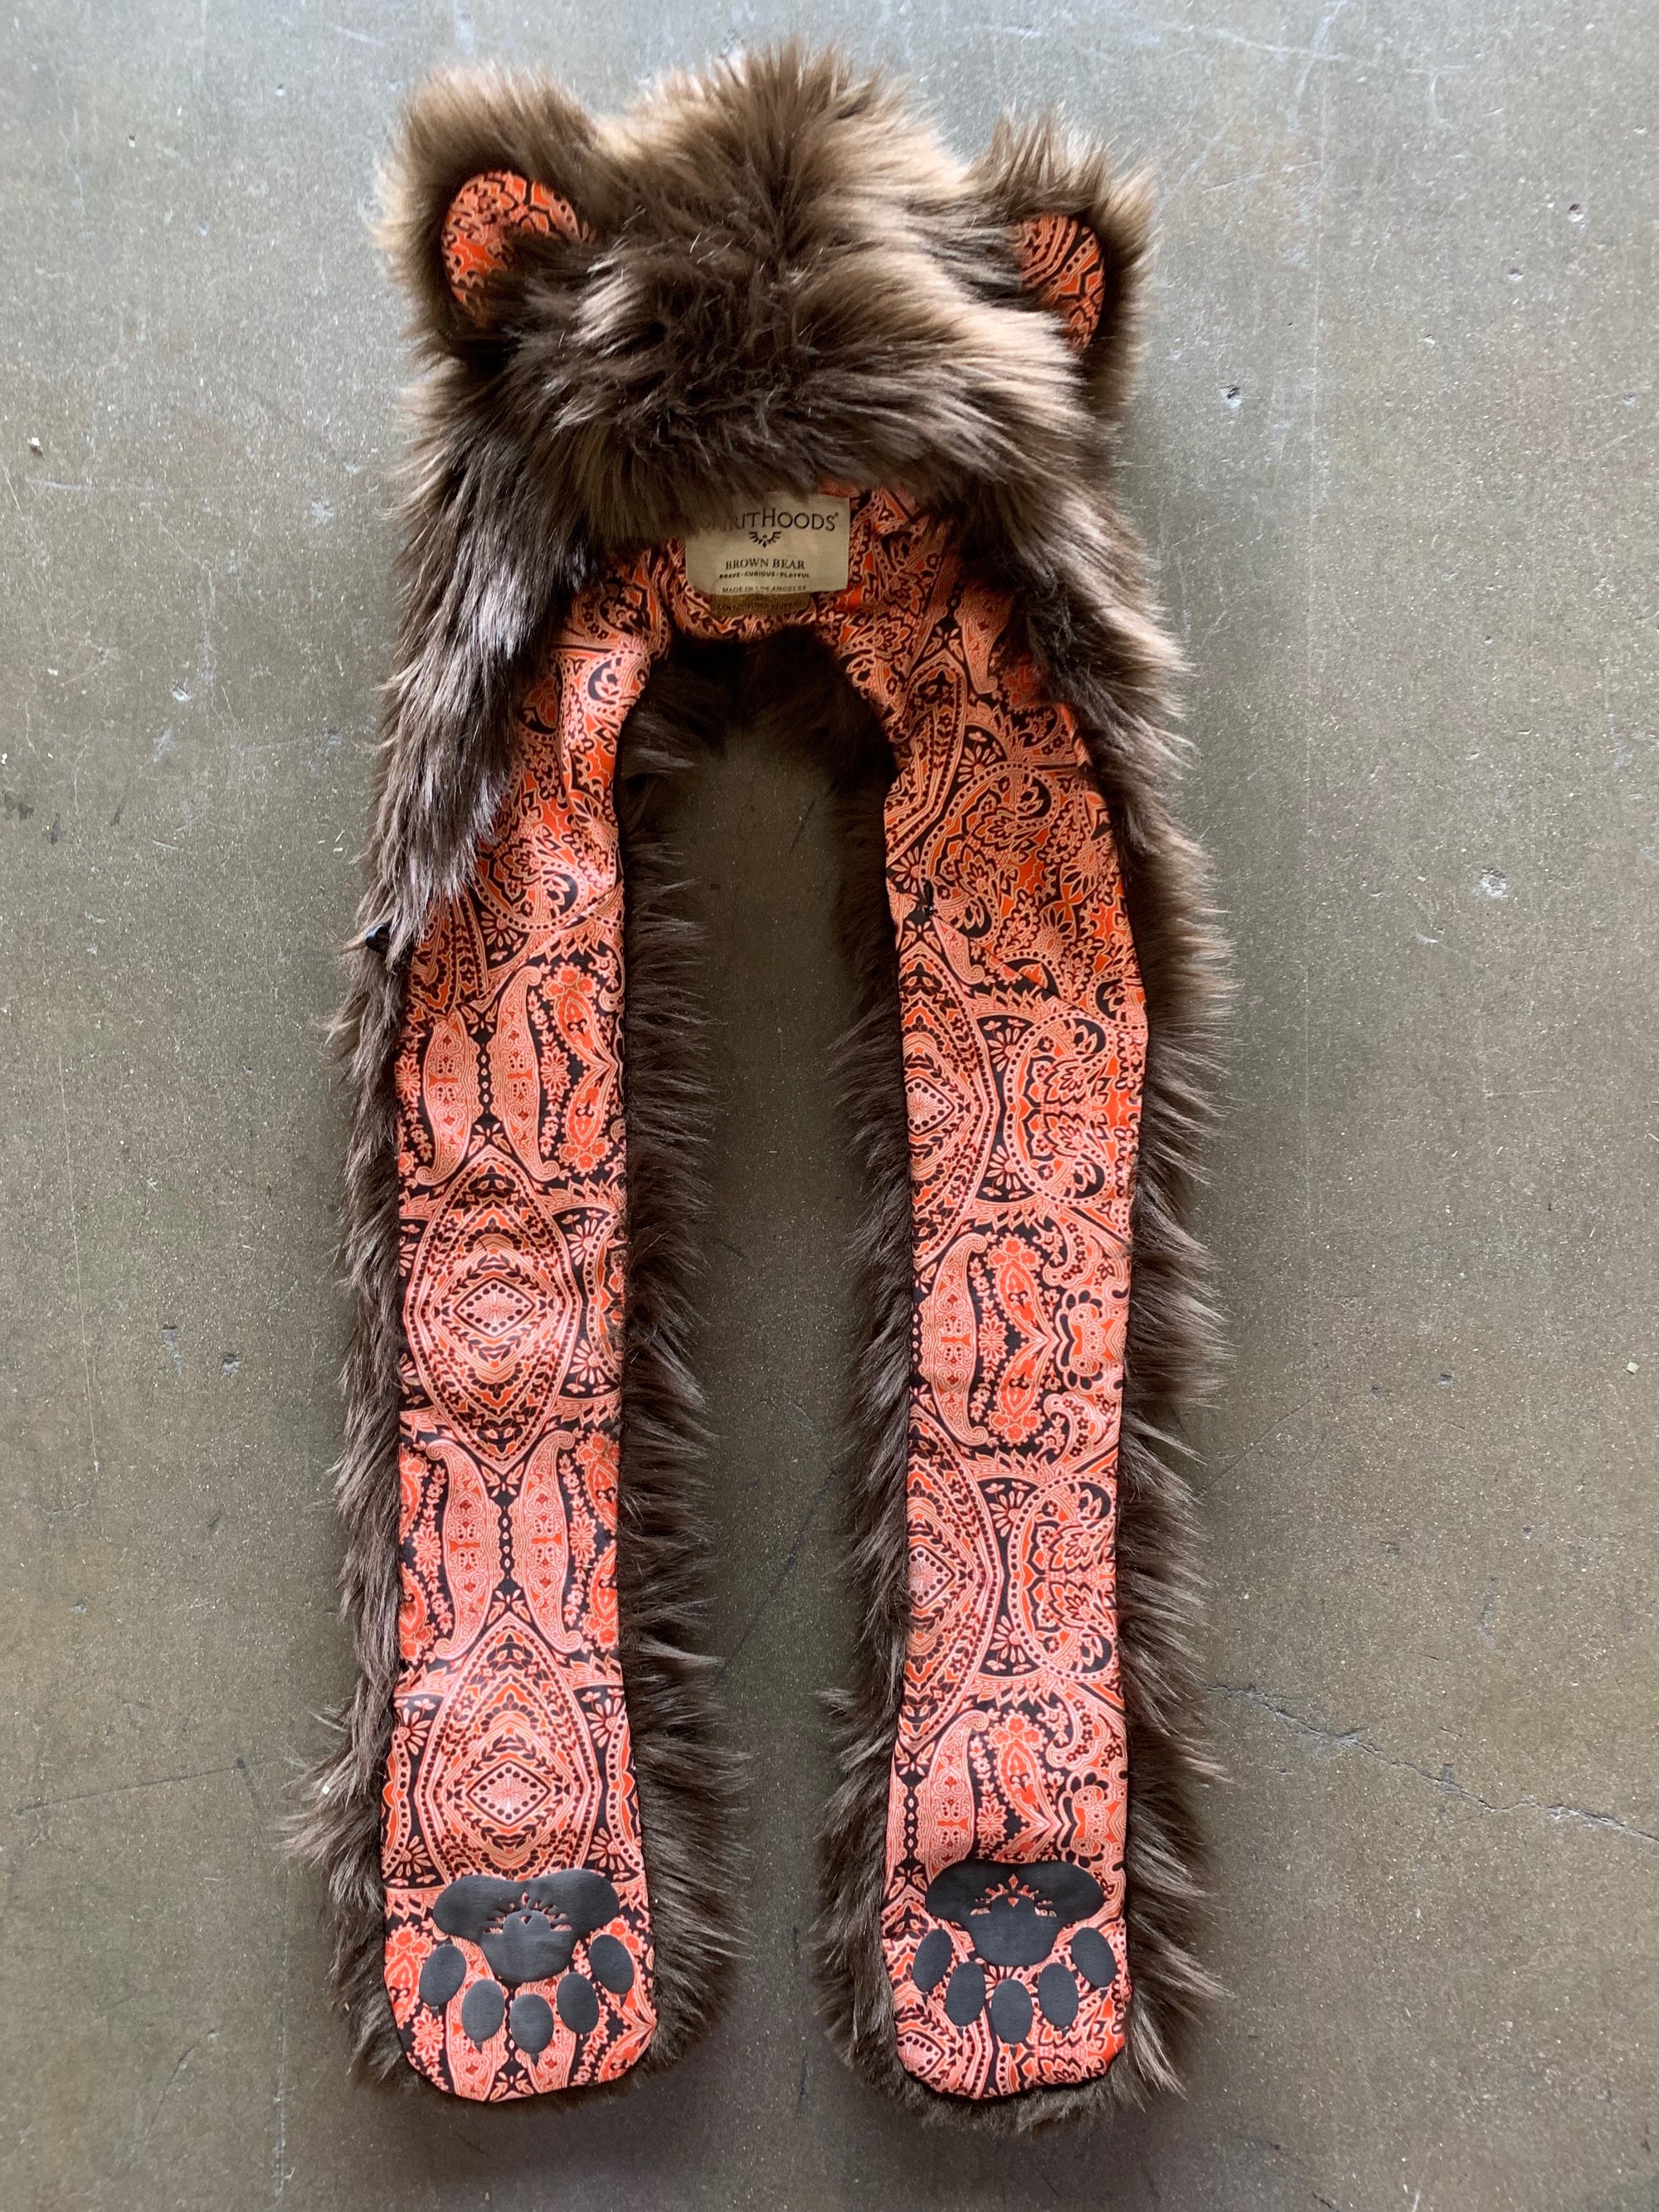 Exterior and Interior View of Unisex Brown Bear Collector Edition SpiritHood